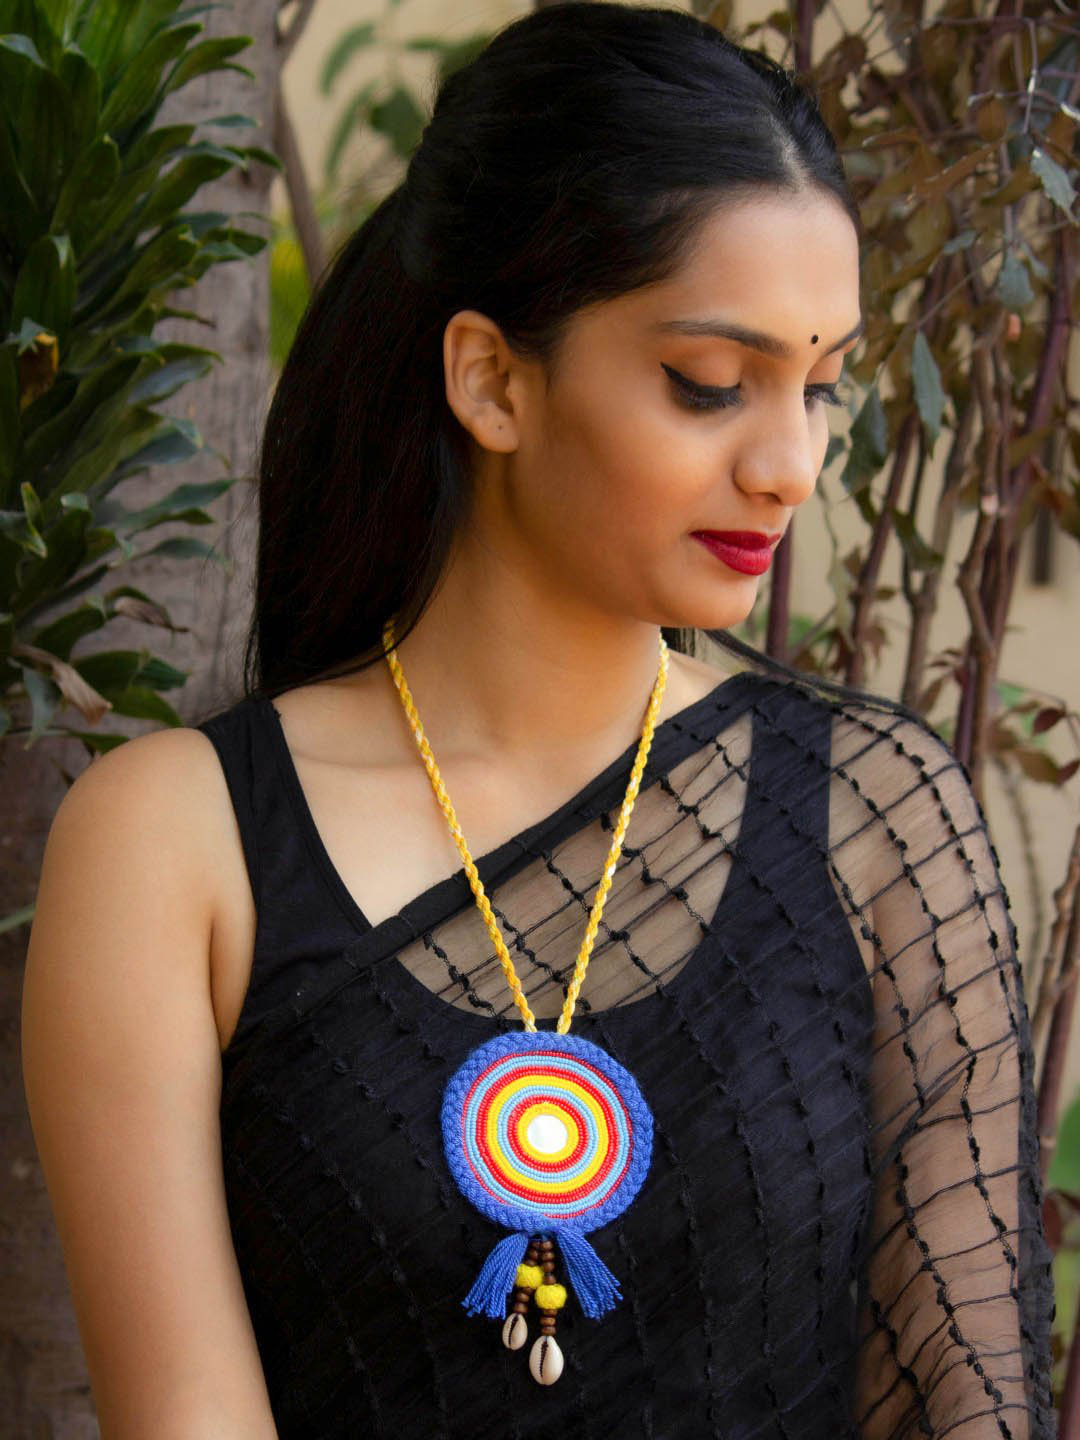 Shop Long Kolhapuri Necklace with Handmade Taas Peacock Pendant and  Matching Earrings - Adjustable Length